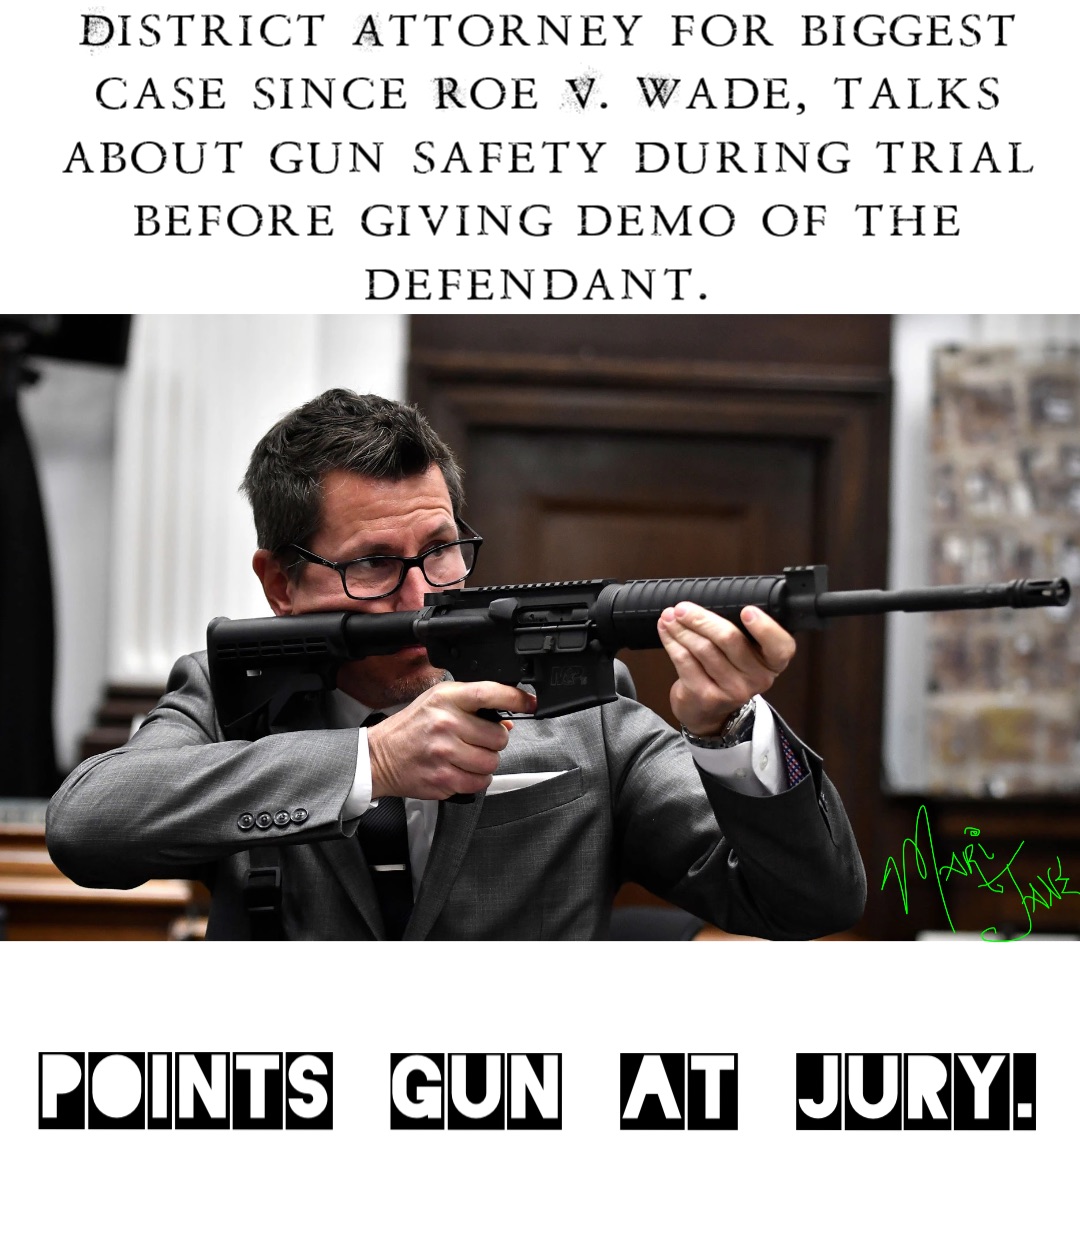 District Attorney for biggest case since Roe V. Wade, talks about gun safety during trial before giving demo of the defendant. POINTS GUN AT JURY.